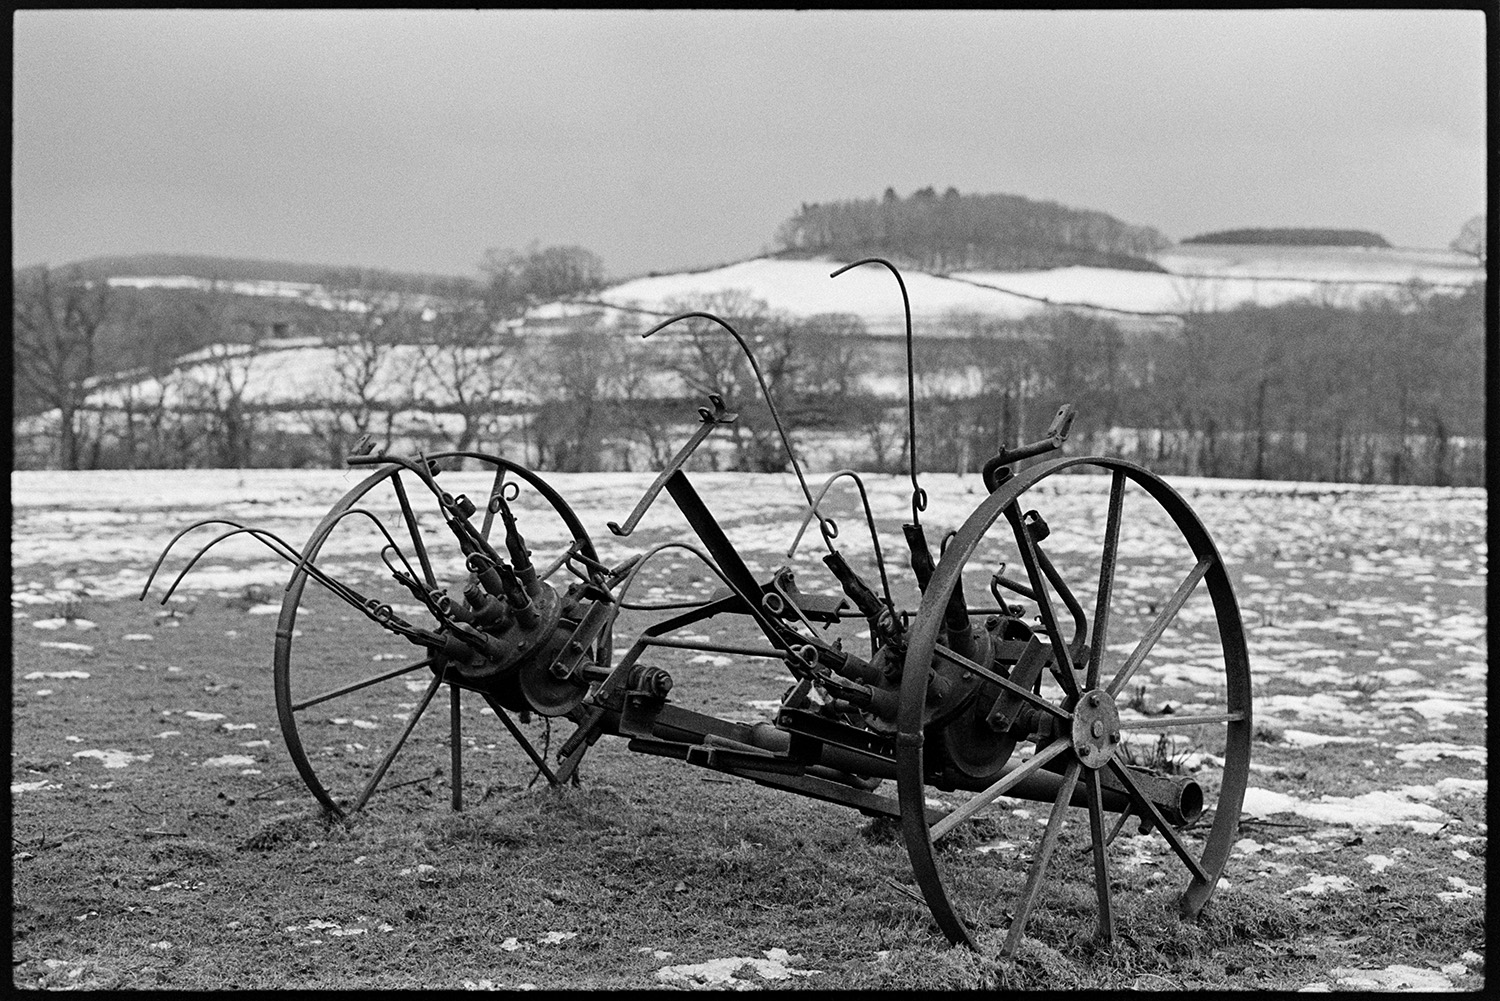 Snow, old whisk, abandoned in field. 
[An old hay whisk in a snowy field at Ashwell, Dolton.]